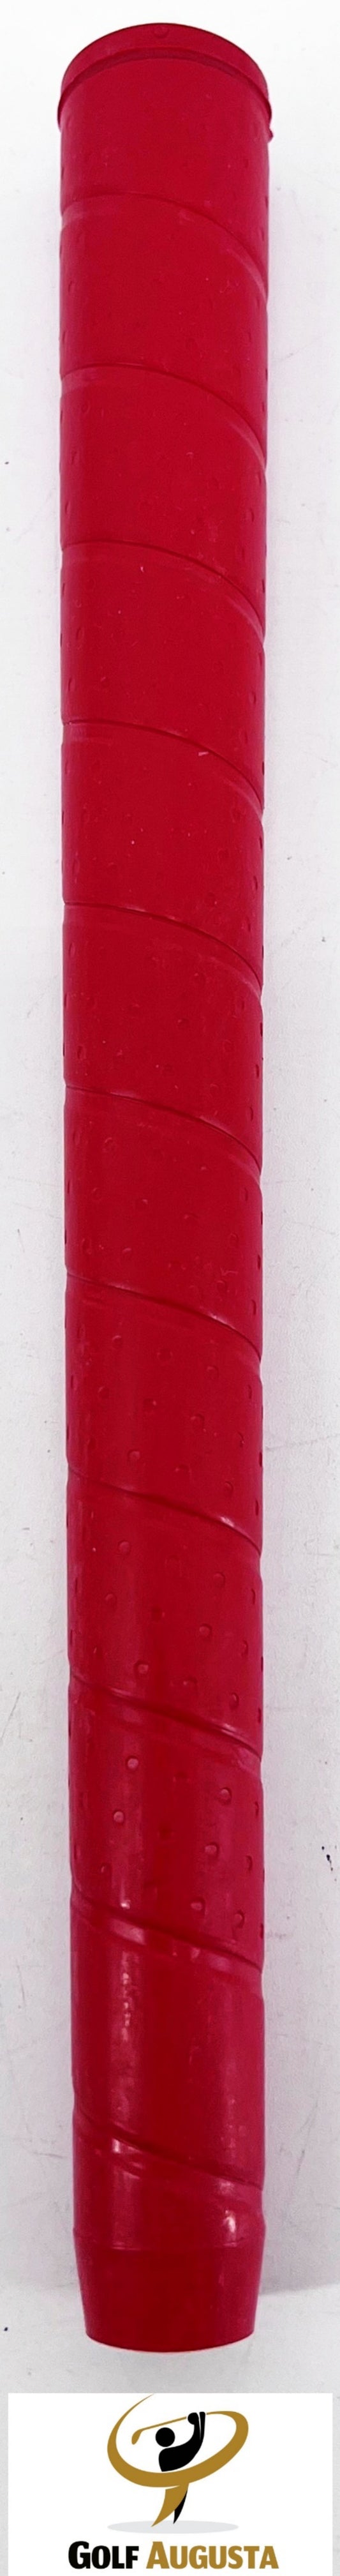 Tour Star + Oversize Red Golf Grips Made in the USA Quantity = 1